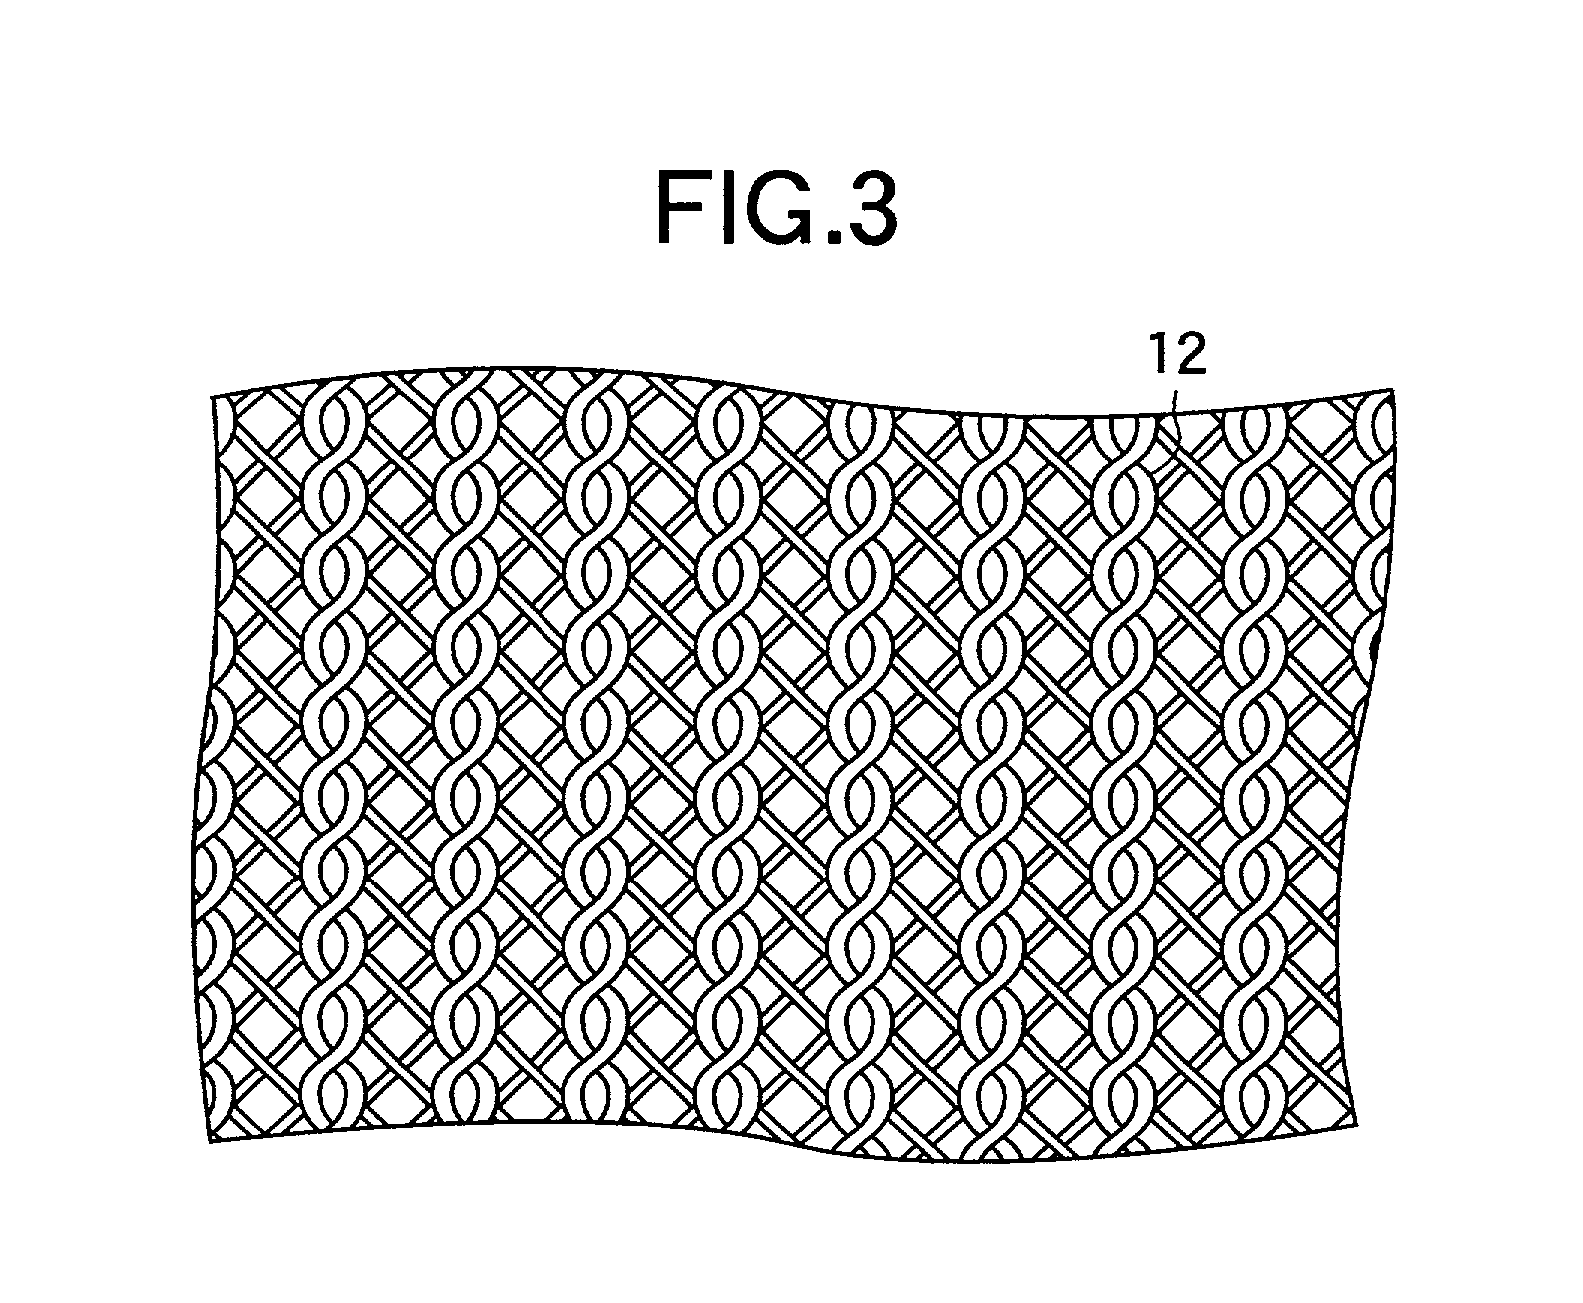 Net fabric to be processed into net product